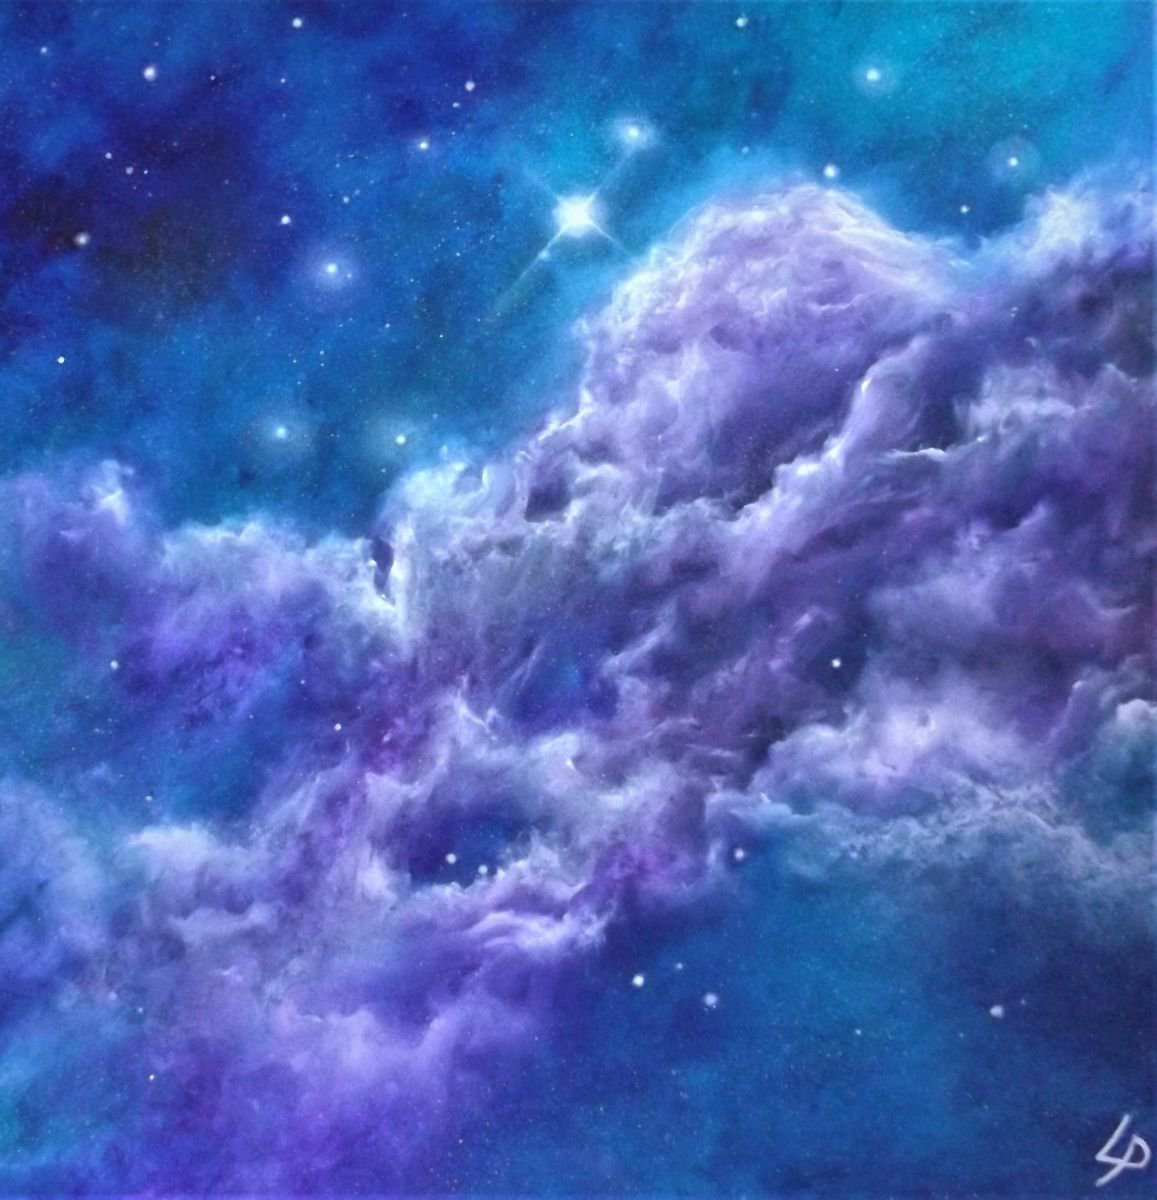 ’And The Stars Look Very Different Today’ Finger-painted Space Art by Lisa Price